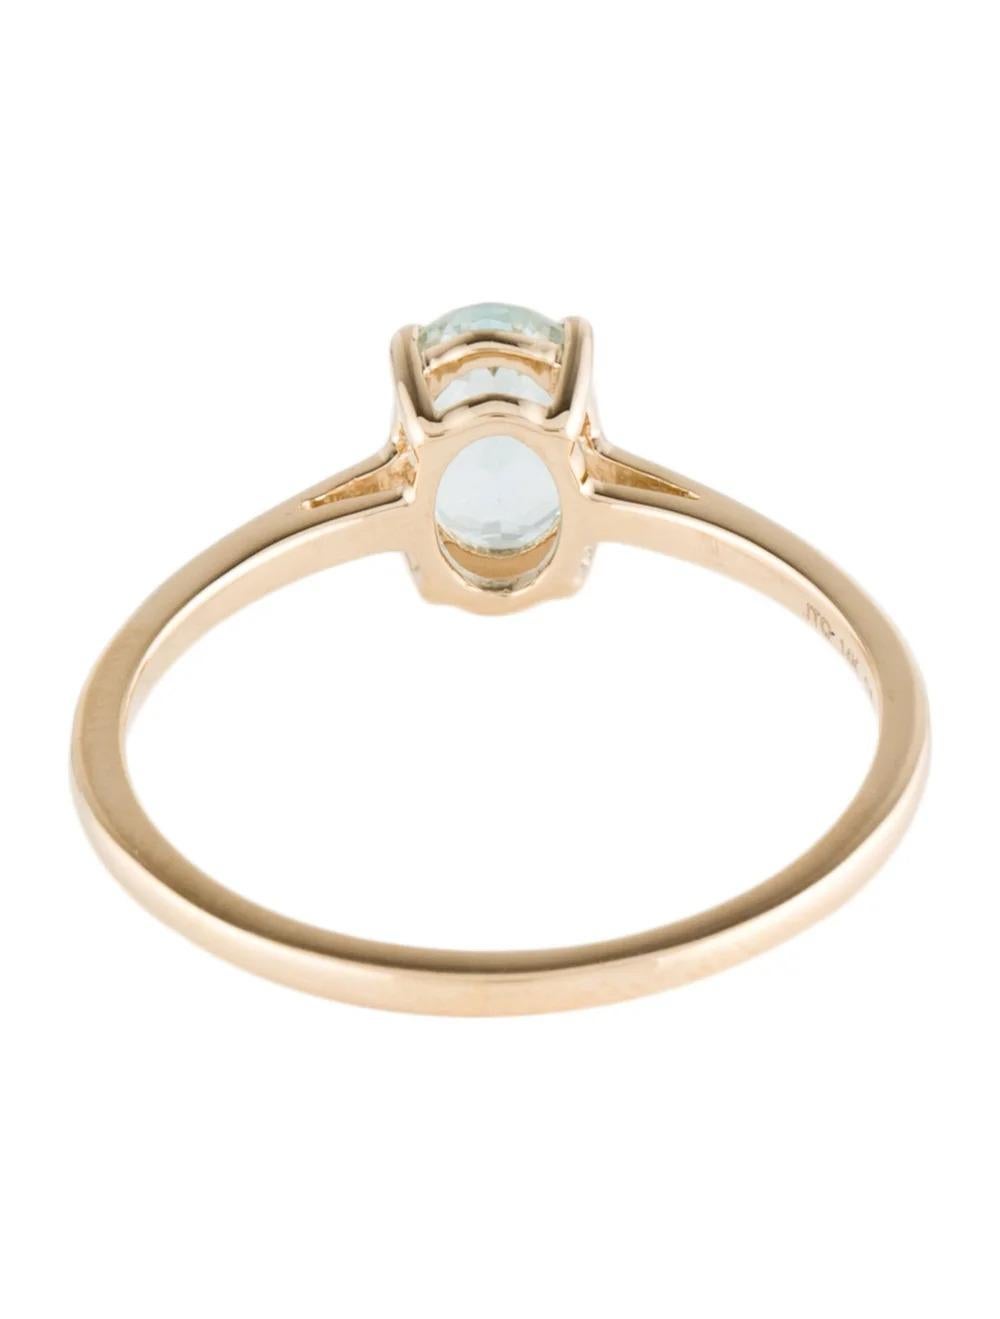 14K Aquamarine Cocktail Ring, Size 6.25: Elegant Yellow Gold Setting, Stunning In New Condition For Sale In Holtsville, NY